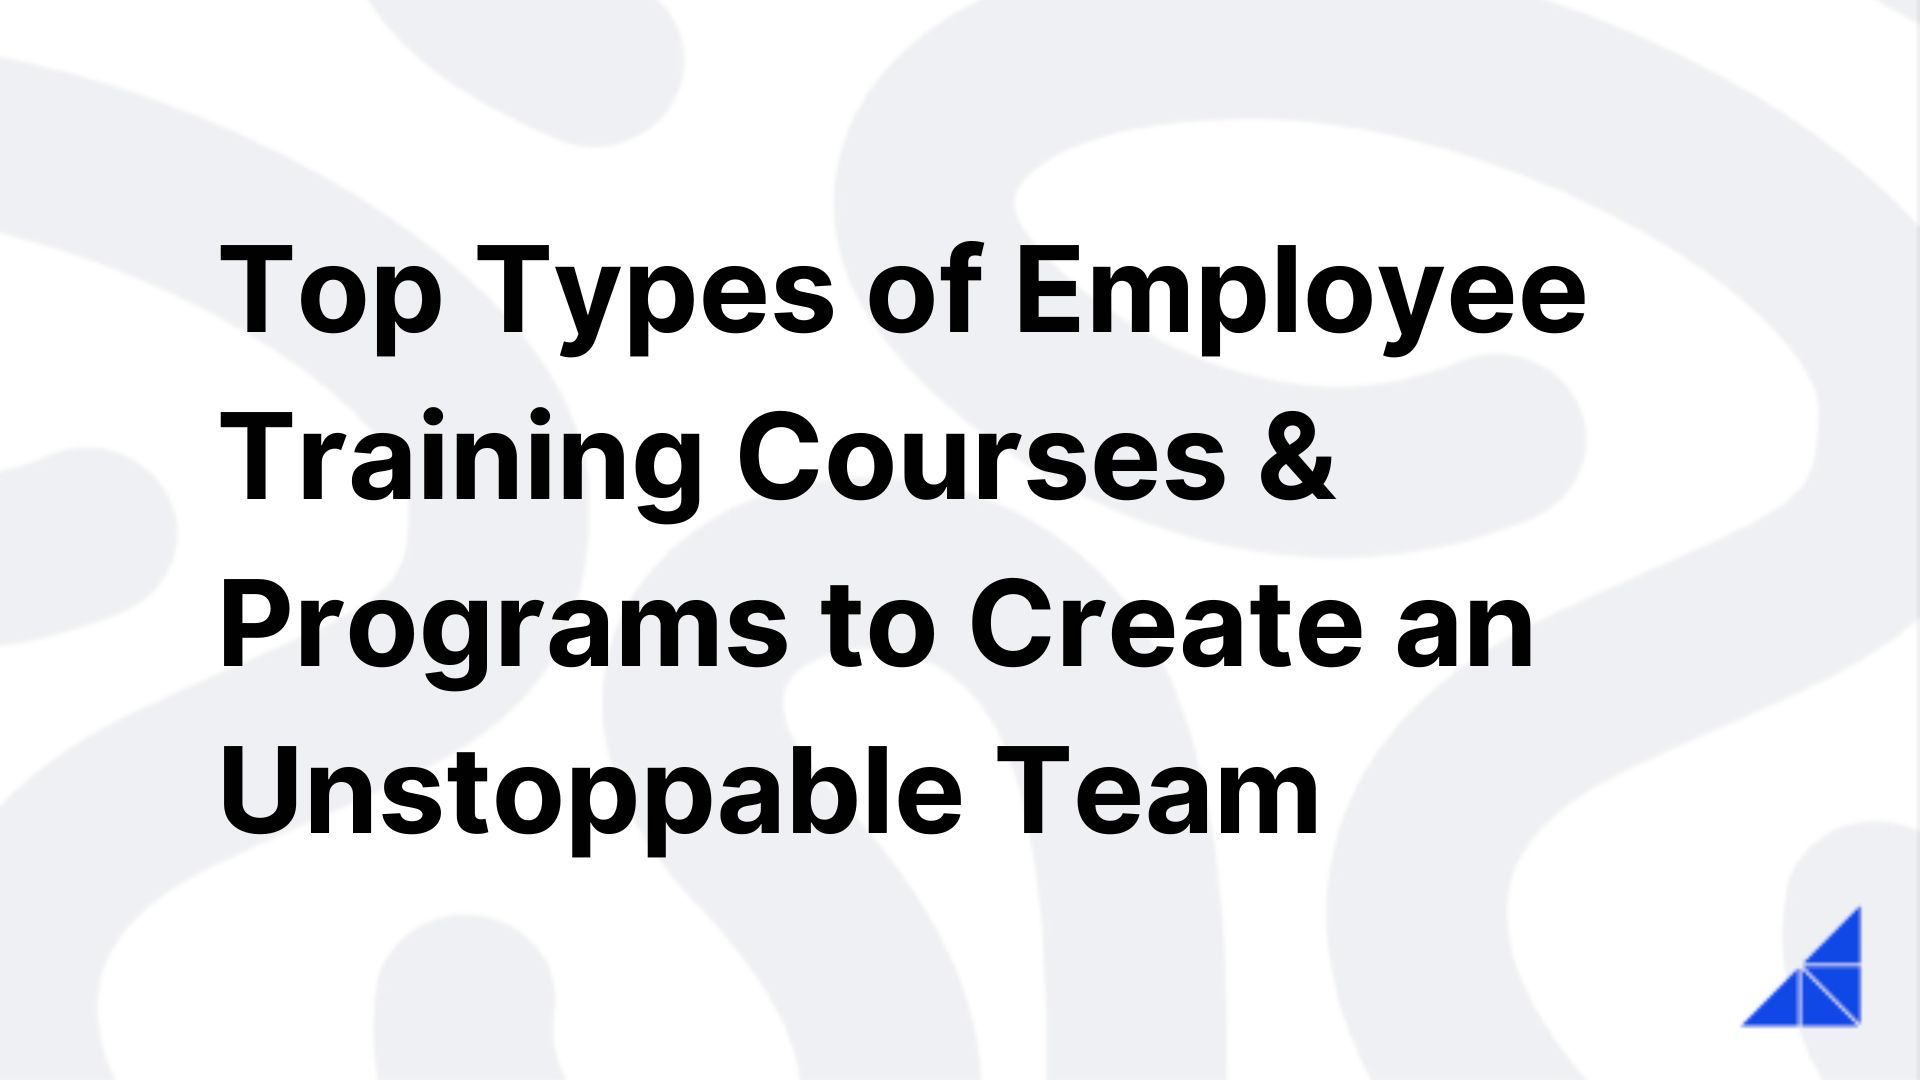 Top Types of Employee Training Courses & Programs